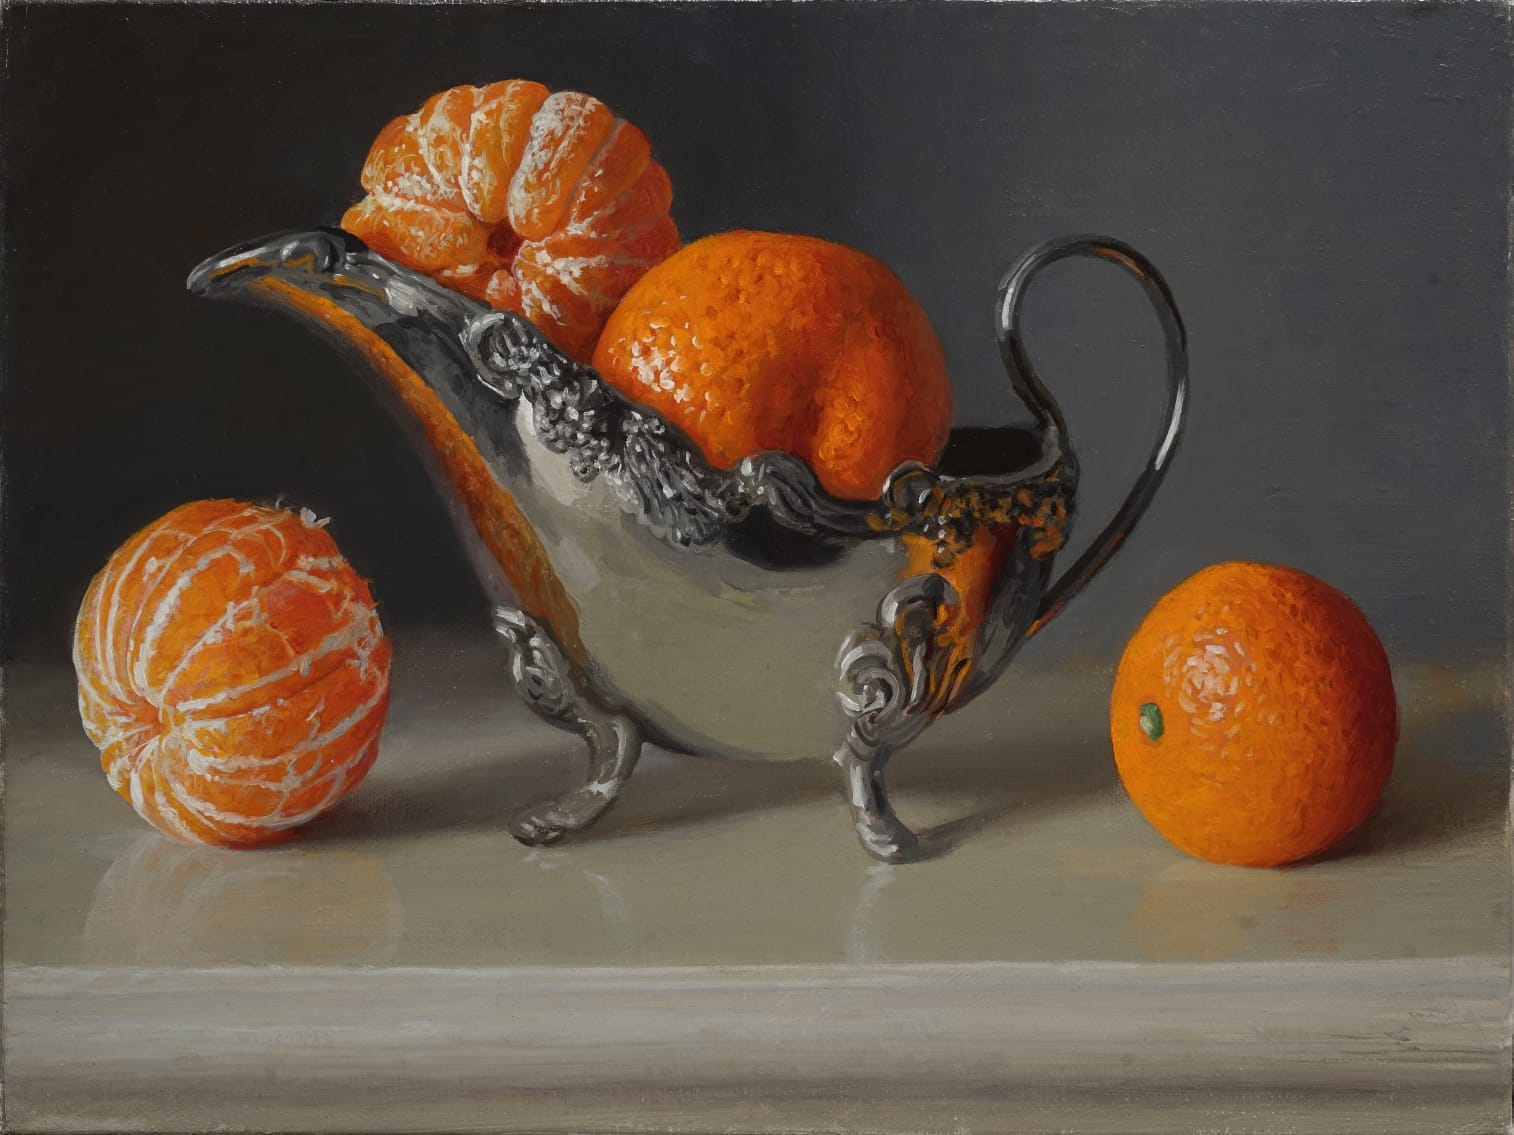 Oranges with a silver cup - 1, Alexander Saidov, 买画 油